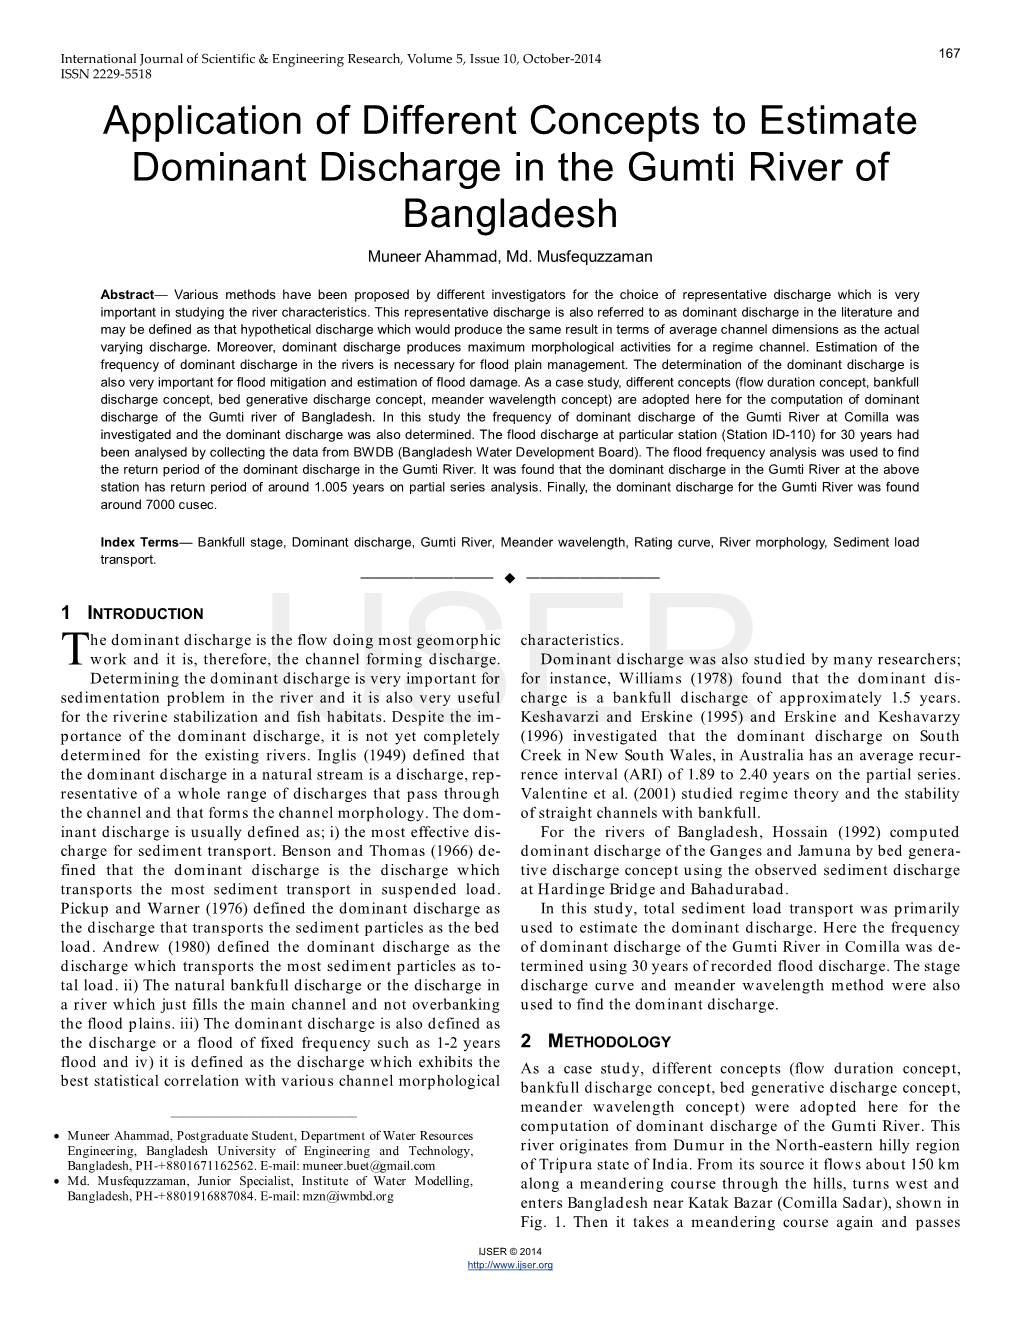 Application of Different Concepts to Estimate Dominant Discharge in the Gumti River of Bangladesh Muneer Ahammad, Md